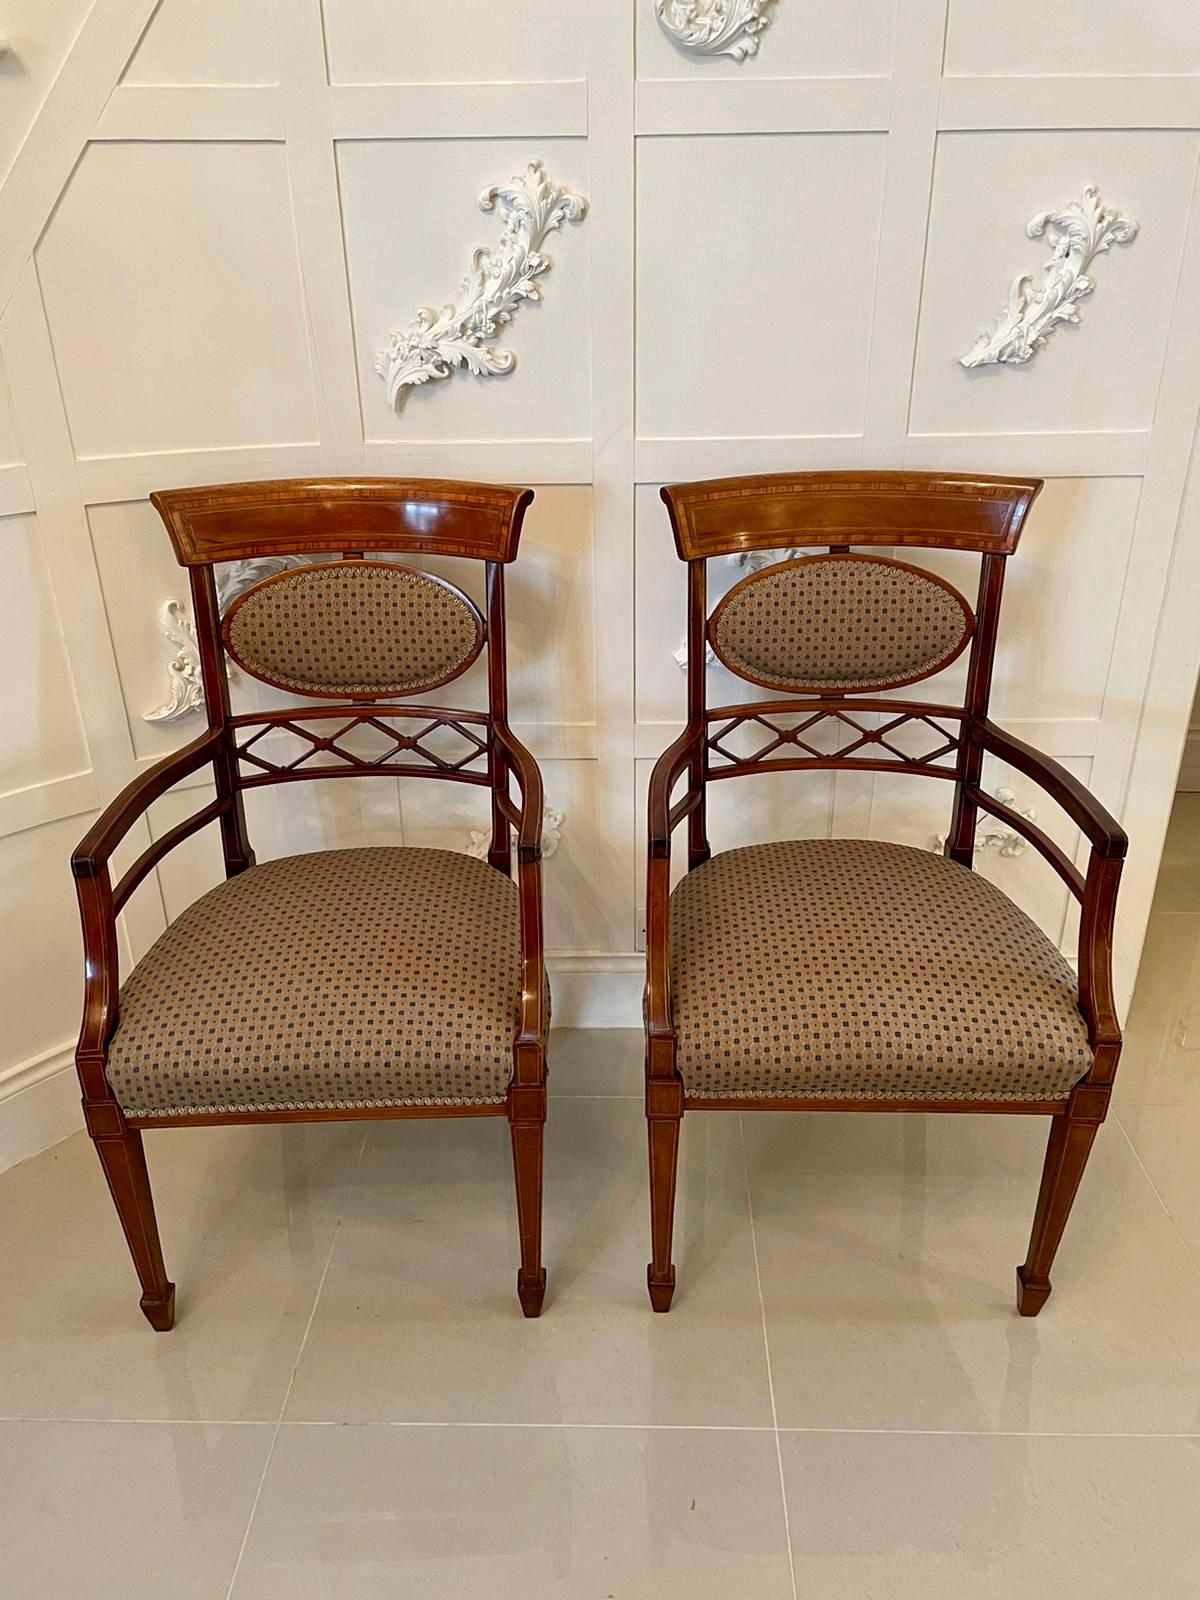 Fine quality elegant 19th century set of eight antique mahogany inlaid dining chairs consisting of two carver chairs having elegant shaped open arms and six single chairs having attractive shaped inlaid mahogany top rails and unusual but pleasing